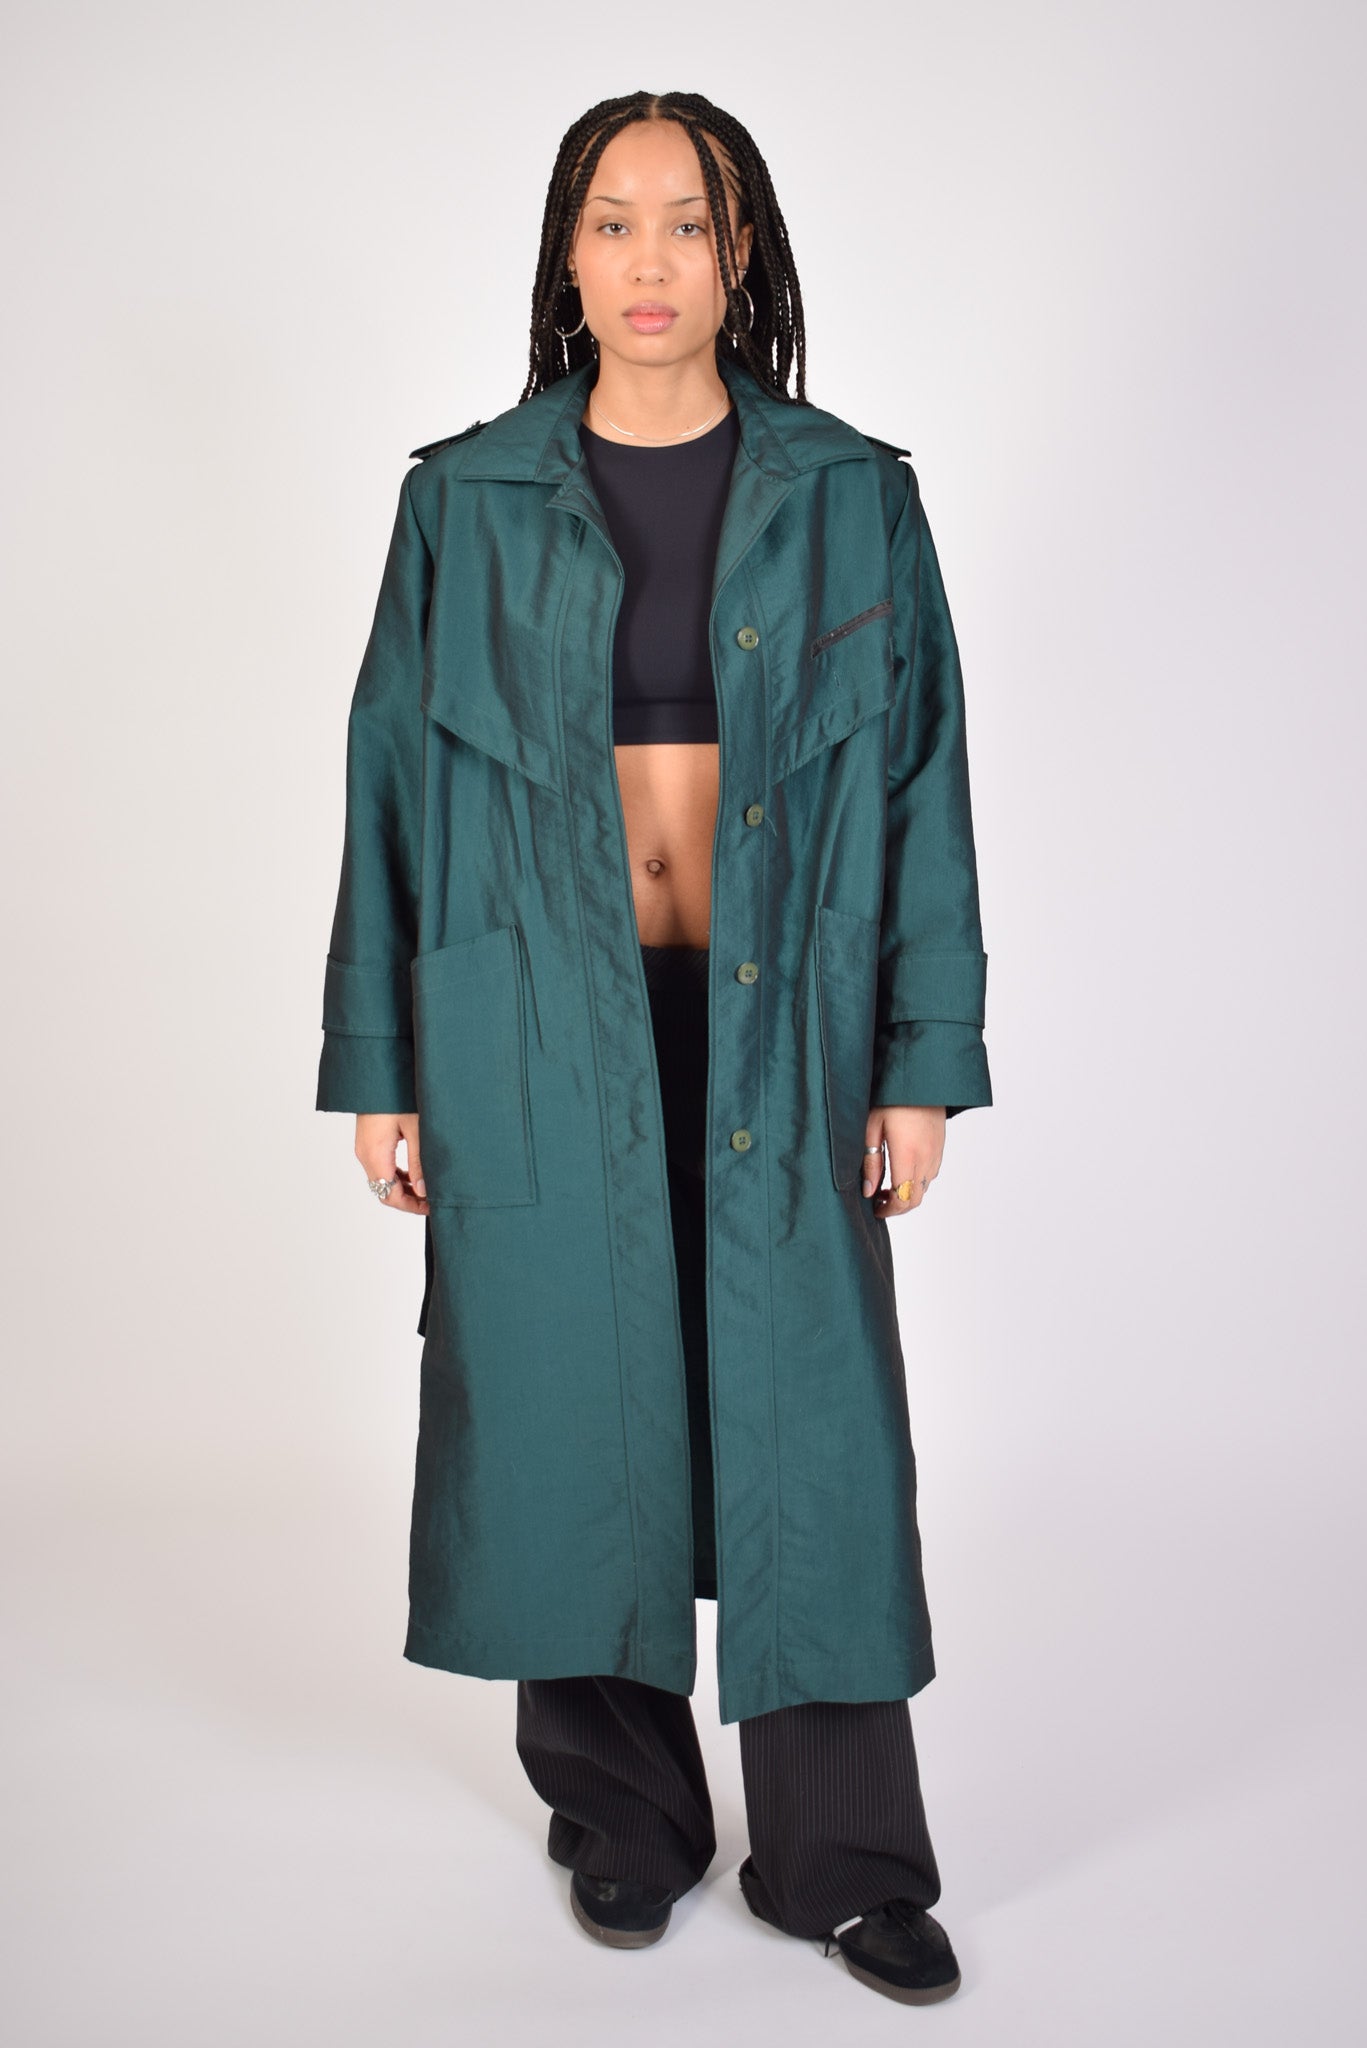 teal reflective trench coat